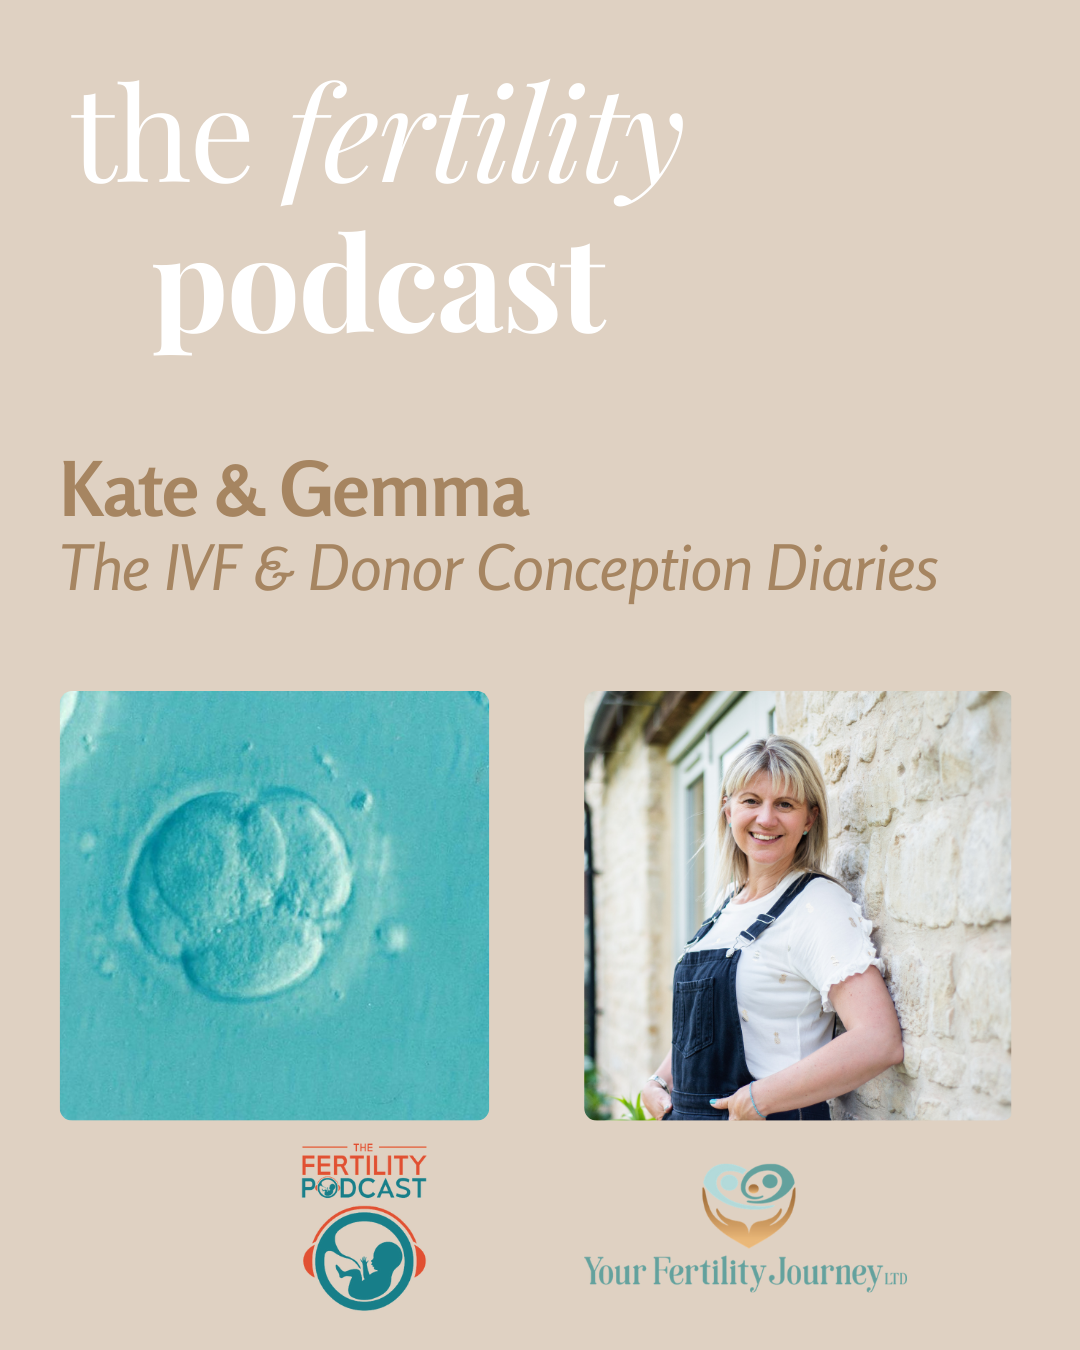 Gemma: The IVF & Donor Conception Diaries